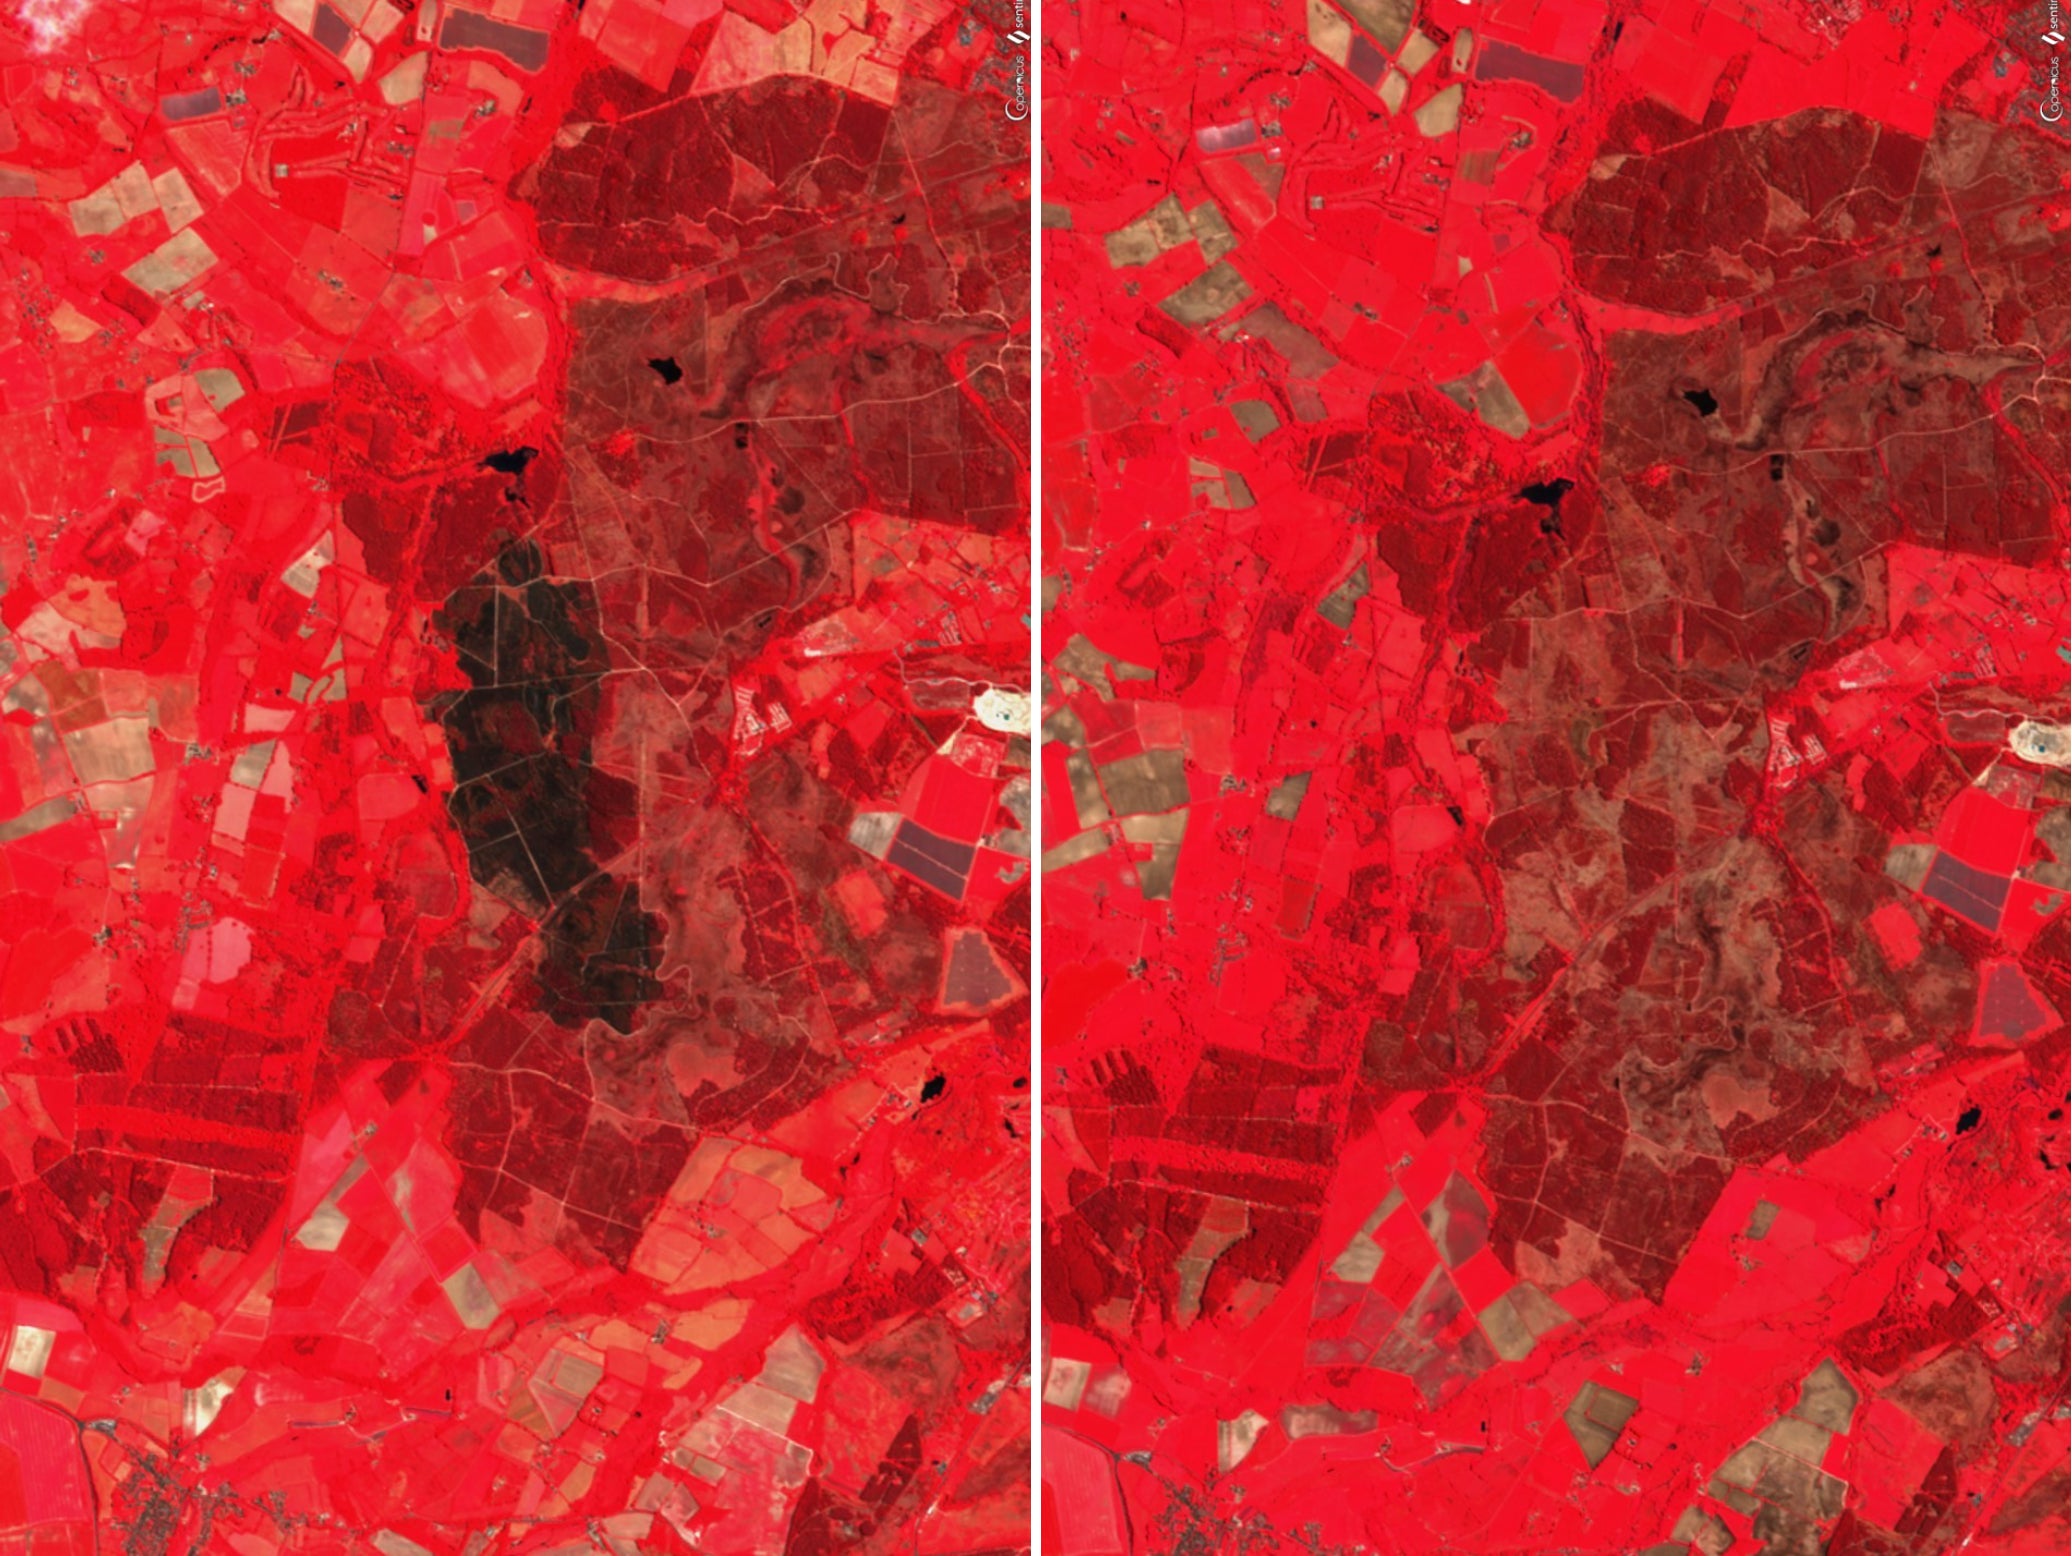 A satellite image of Wareham forest after a fire in 2020 (left) and before (right)